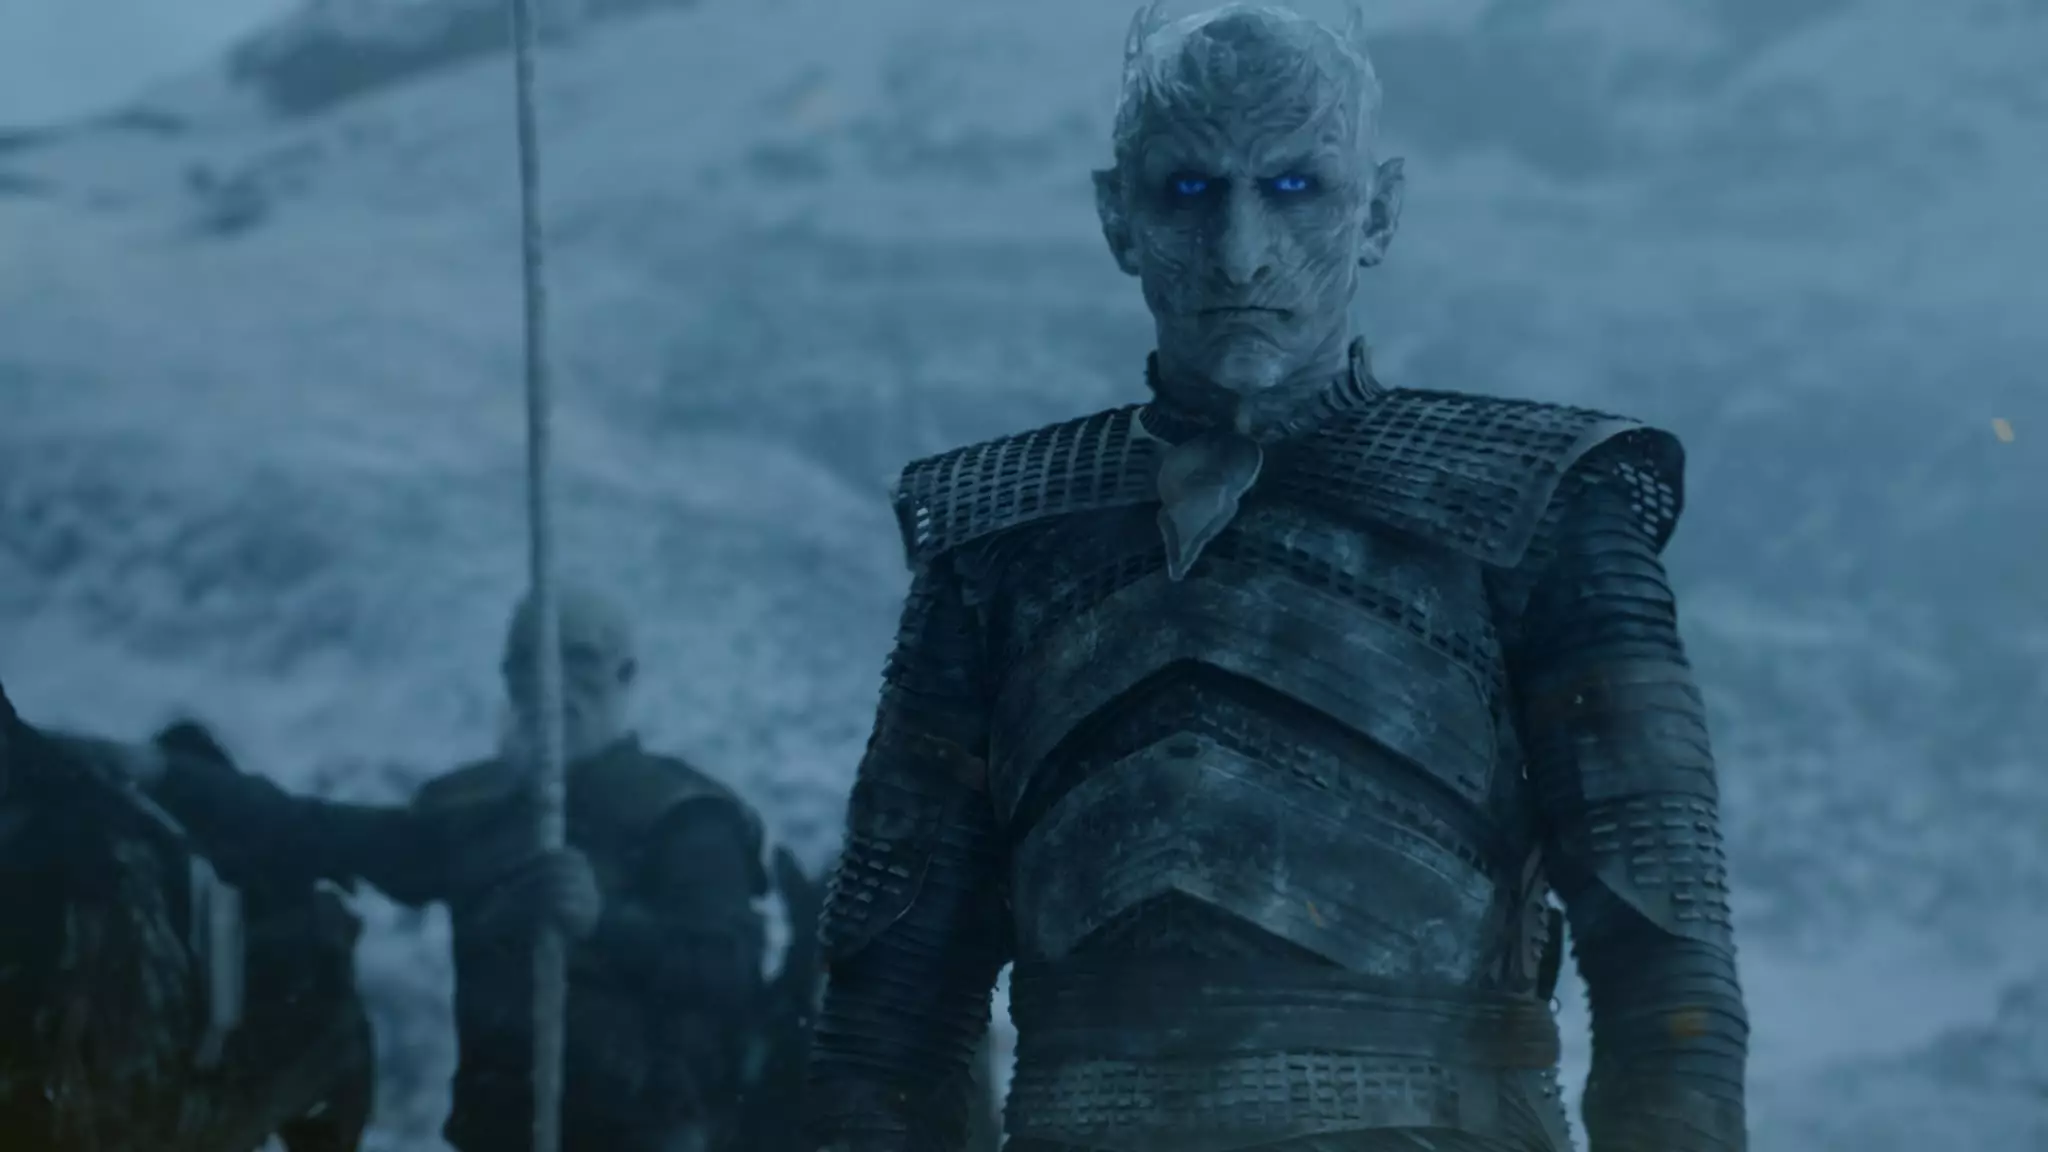 Here he is in full Night King mode.